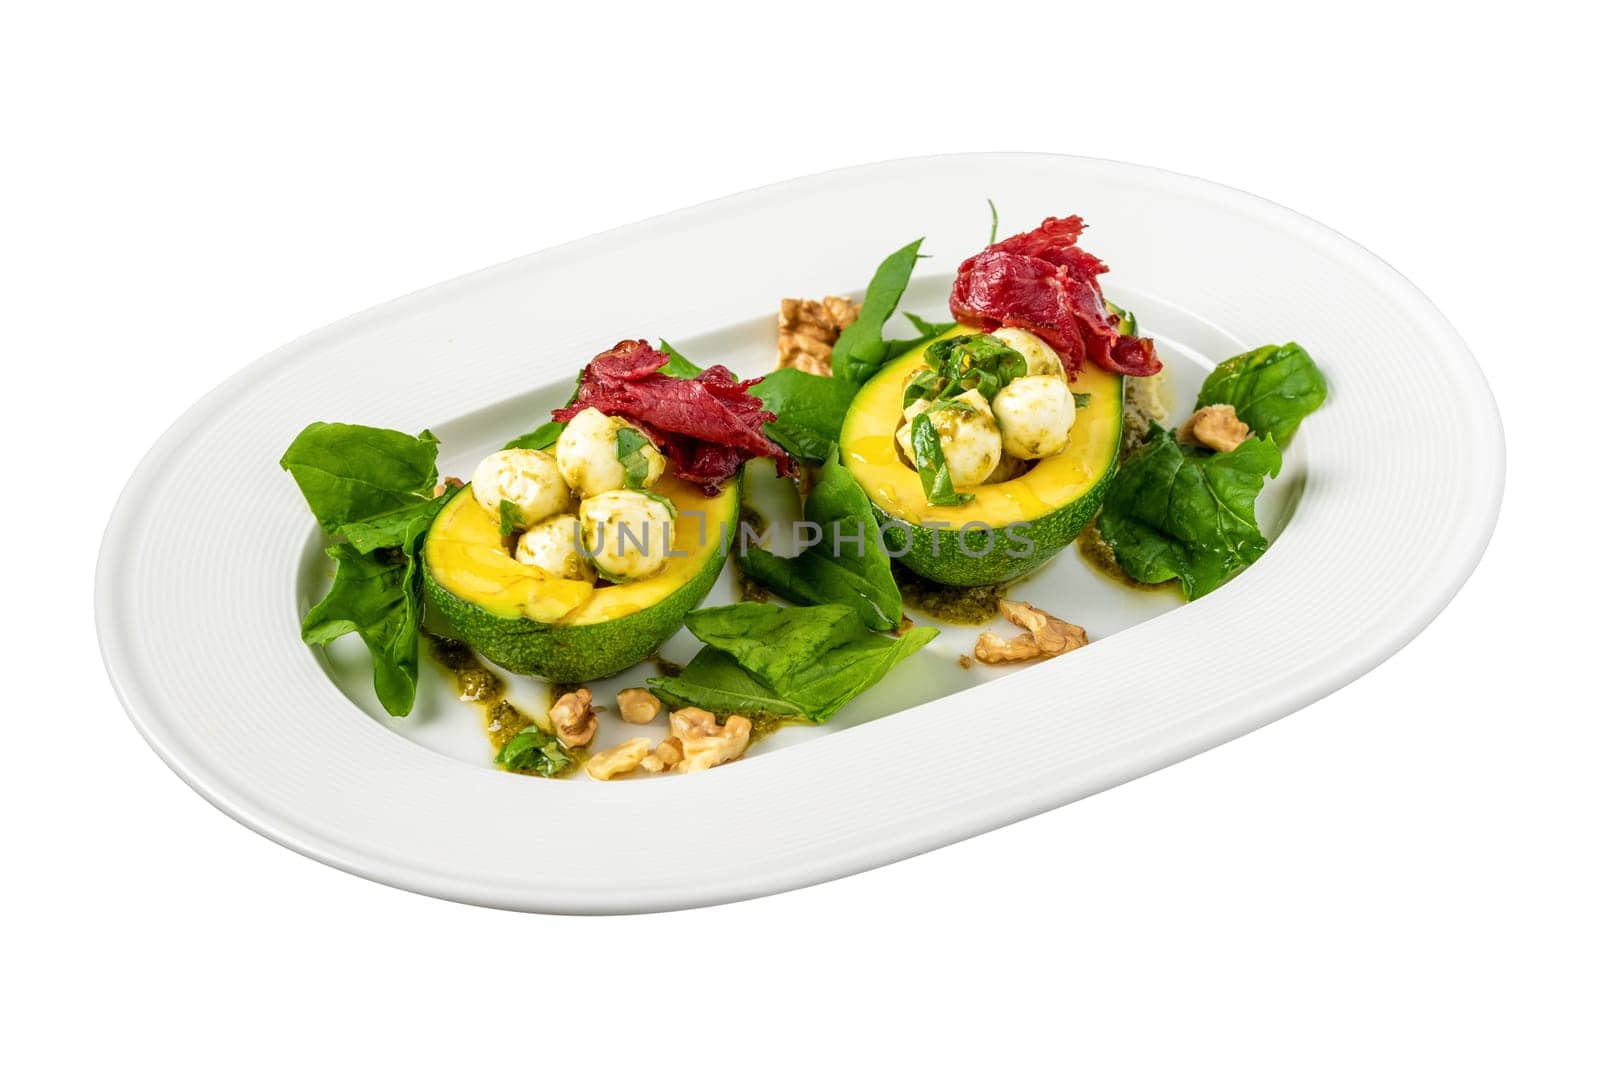 Bocconcini cheese balls in halves of avocado served with salad on white background by Sonat